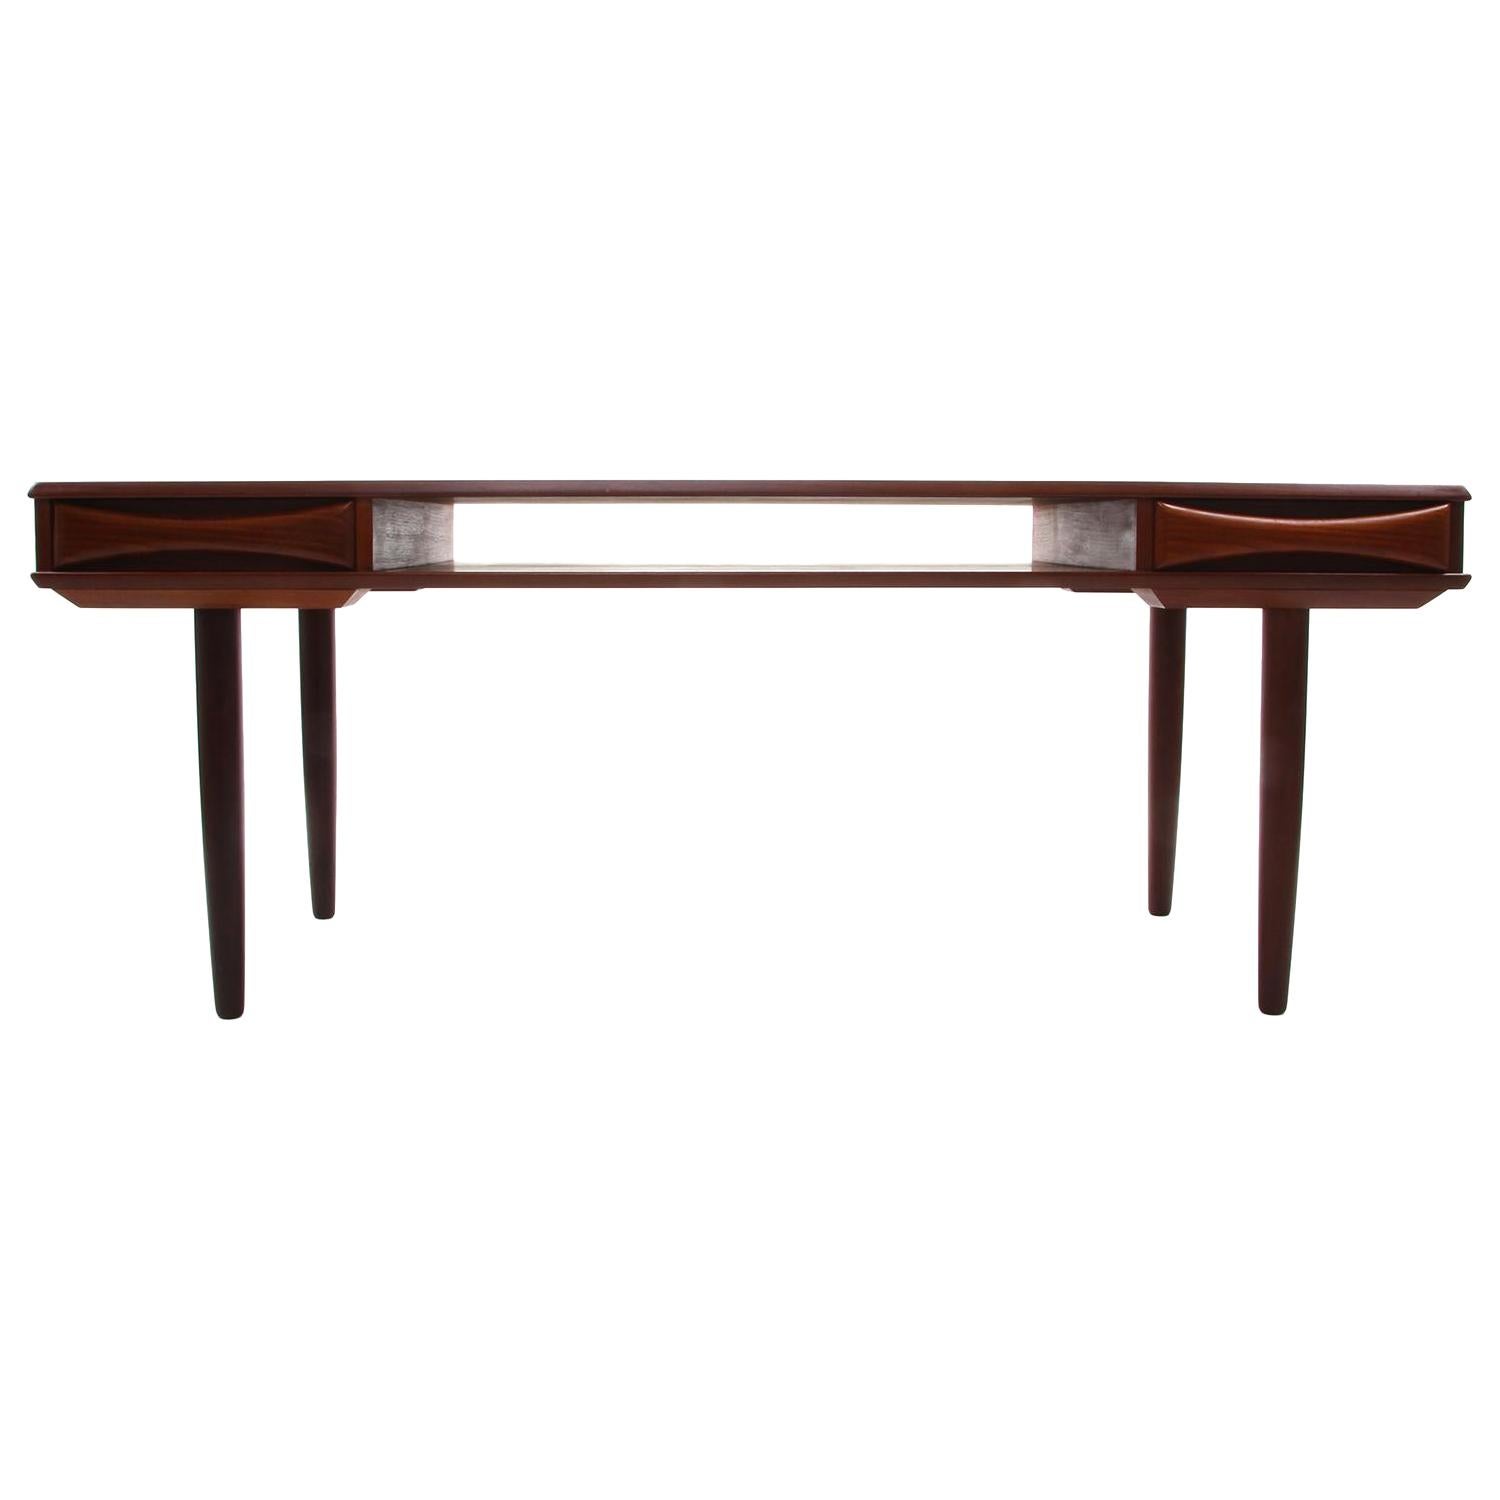 Danish modern Drylund coffee table with bowtie pass-through drawers. This piece oozes Danish midcentury craftsmanship with its many details, the slightly angle on the edges of the table top, the slightly tapered legs and the drawers with stylish